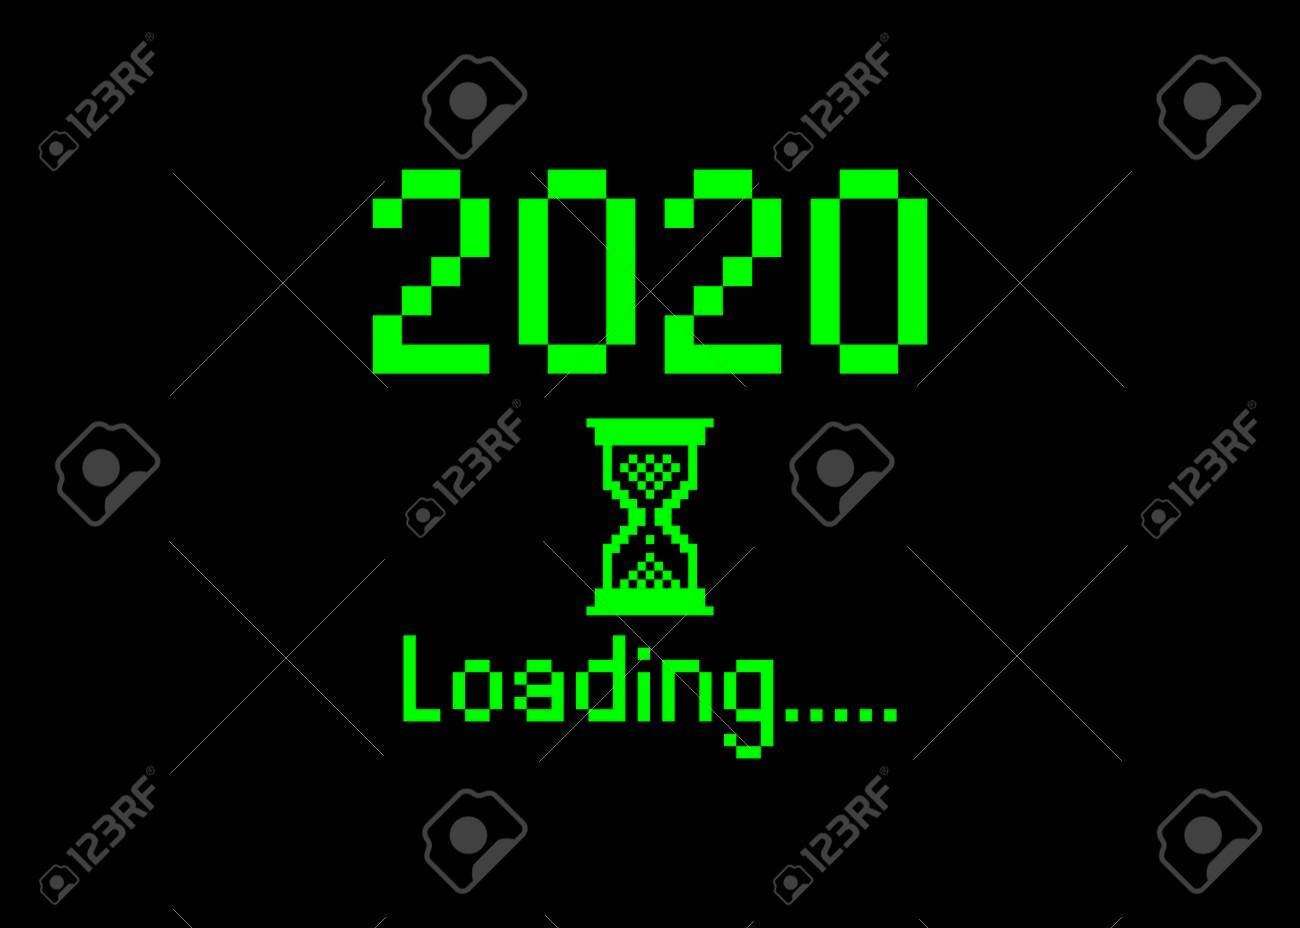 Happy New Year 2020 With Loading Icon Pixel Art Bitmap Style